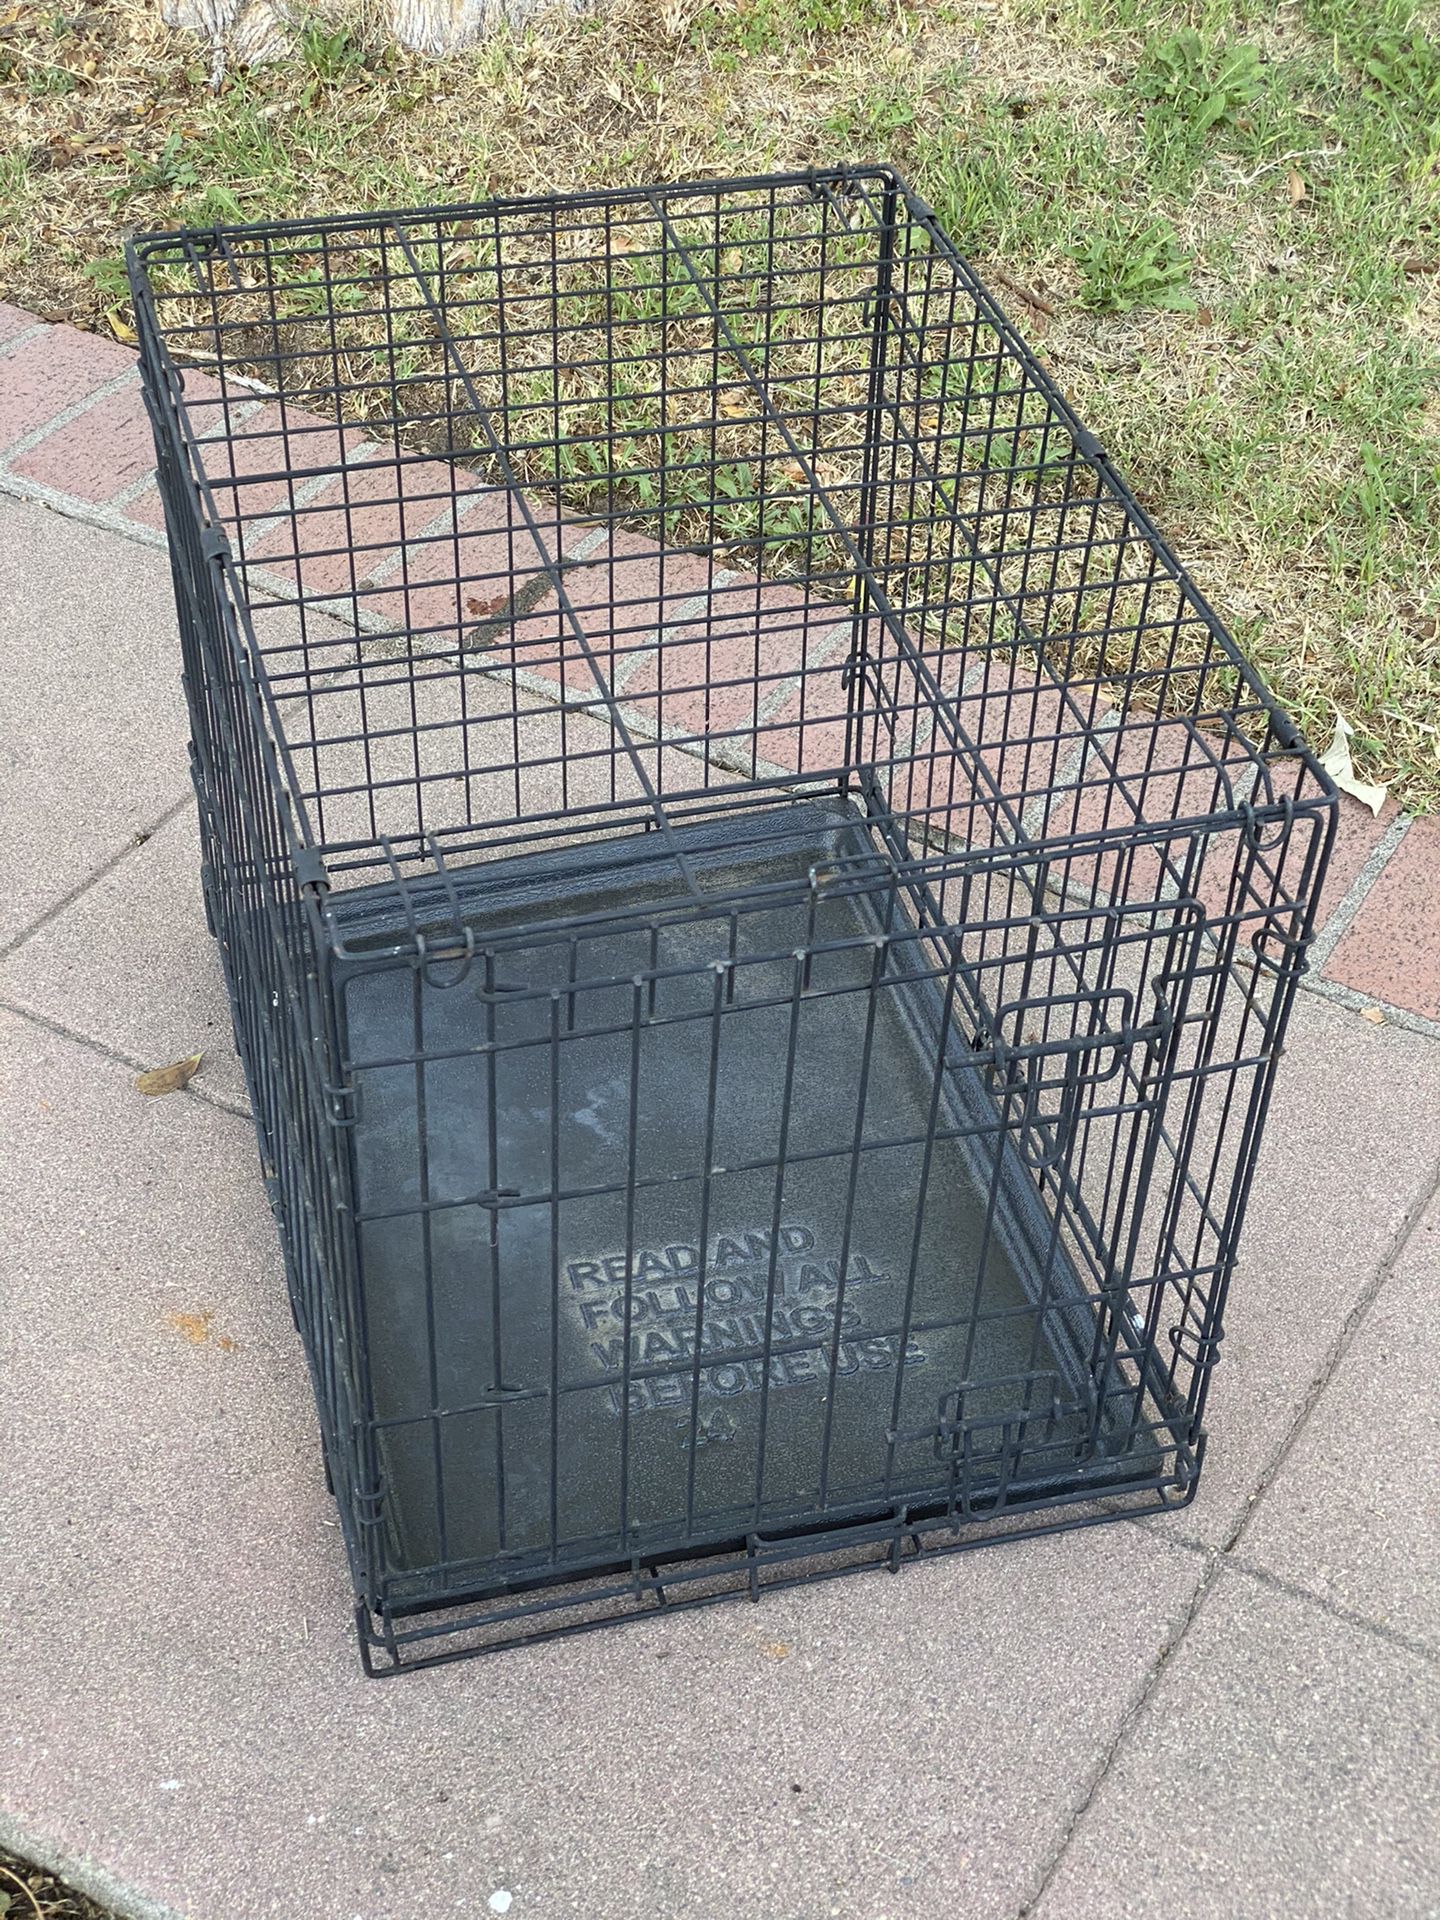 Metal DOG crate/kennel - Excellent condition!!